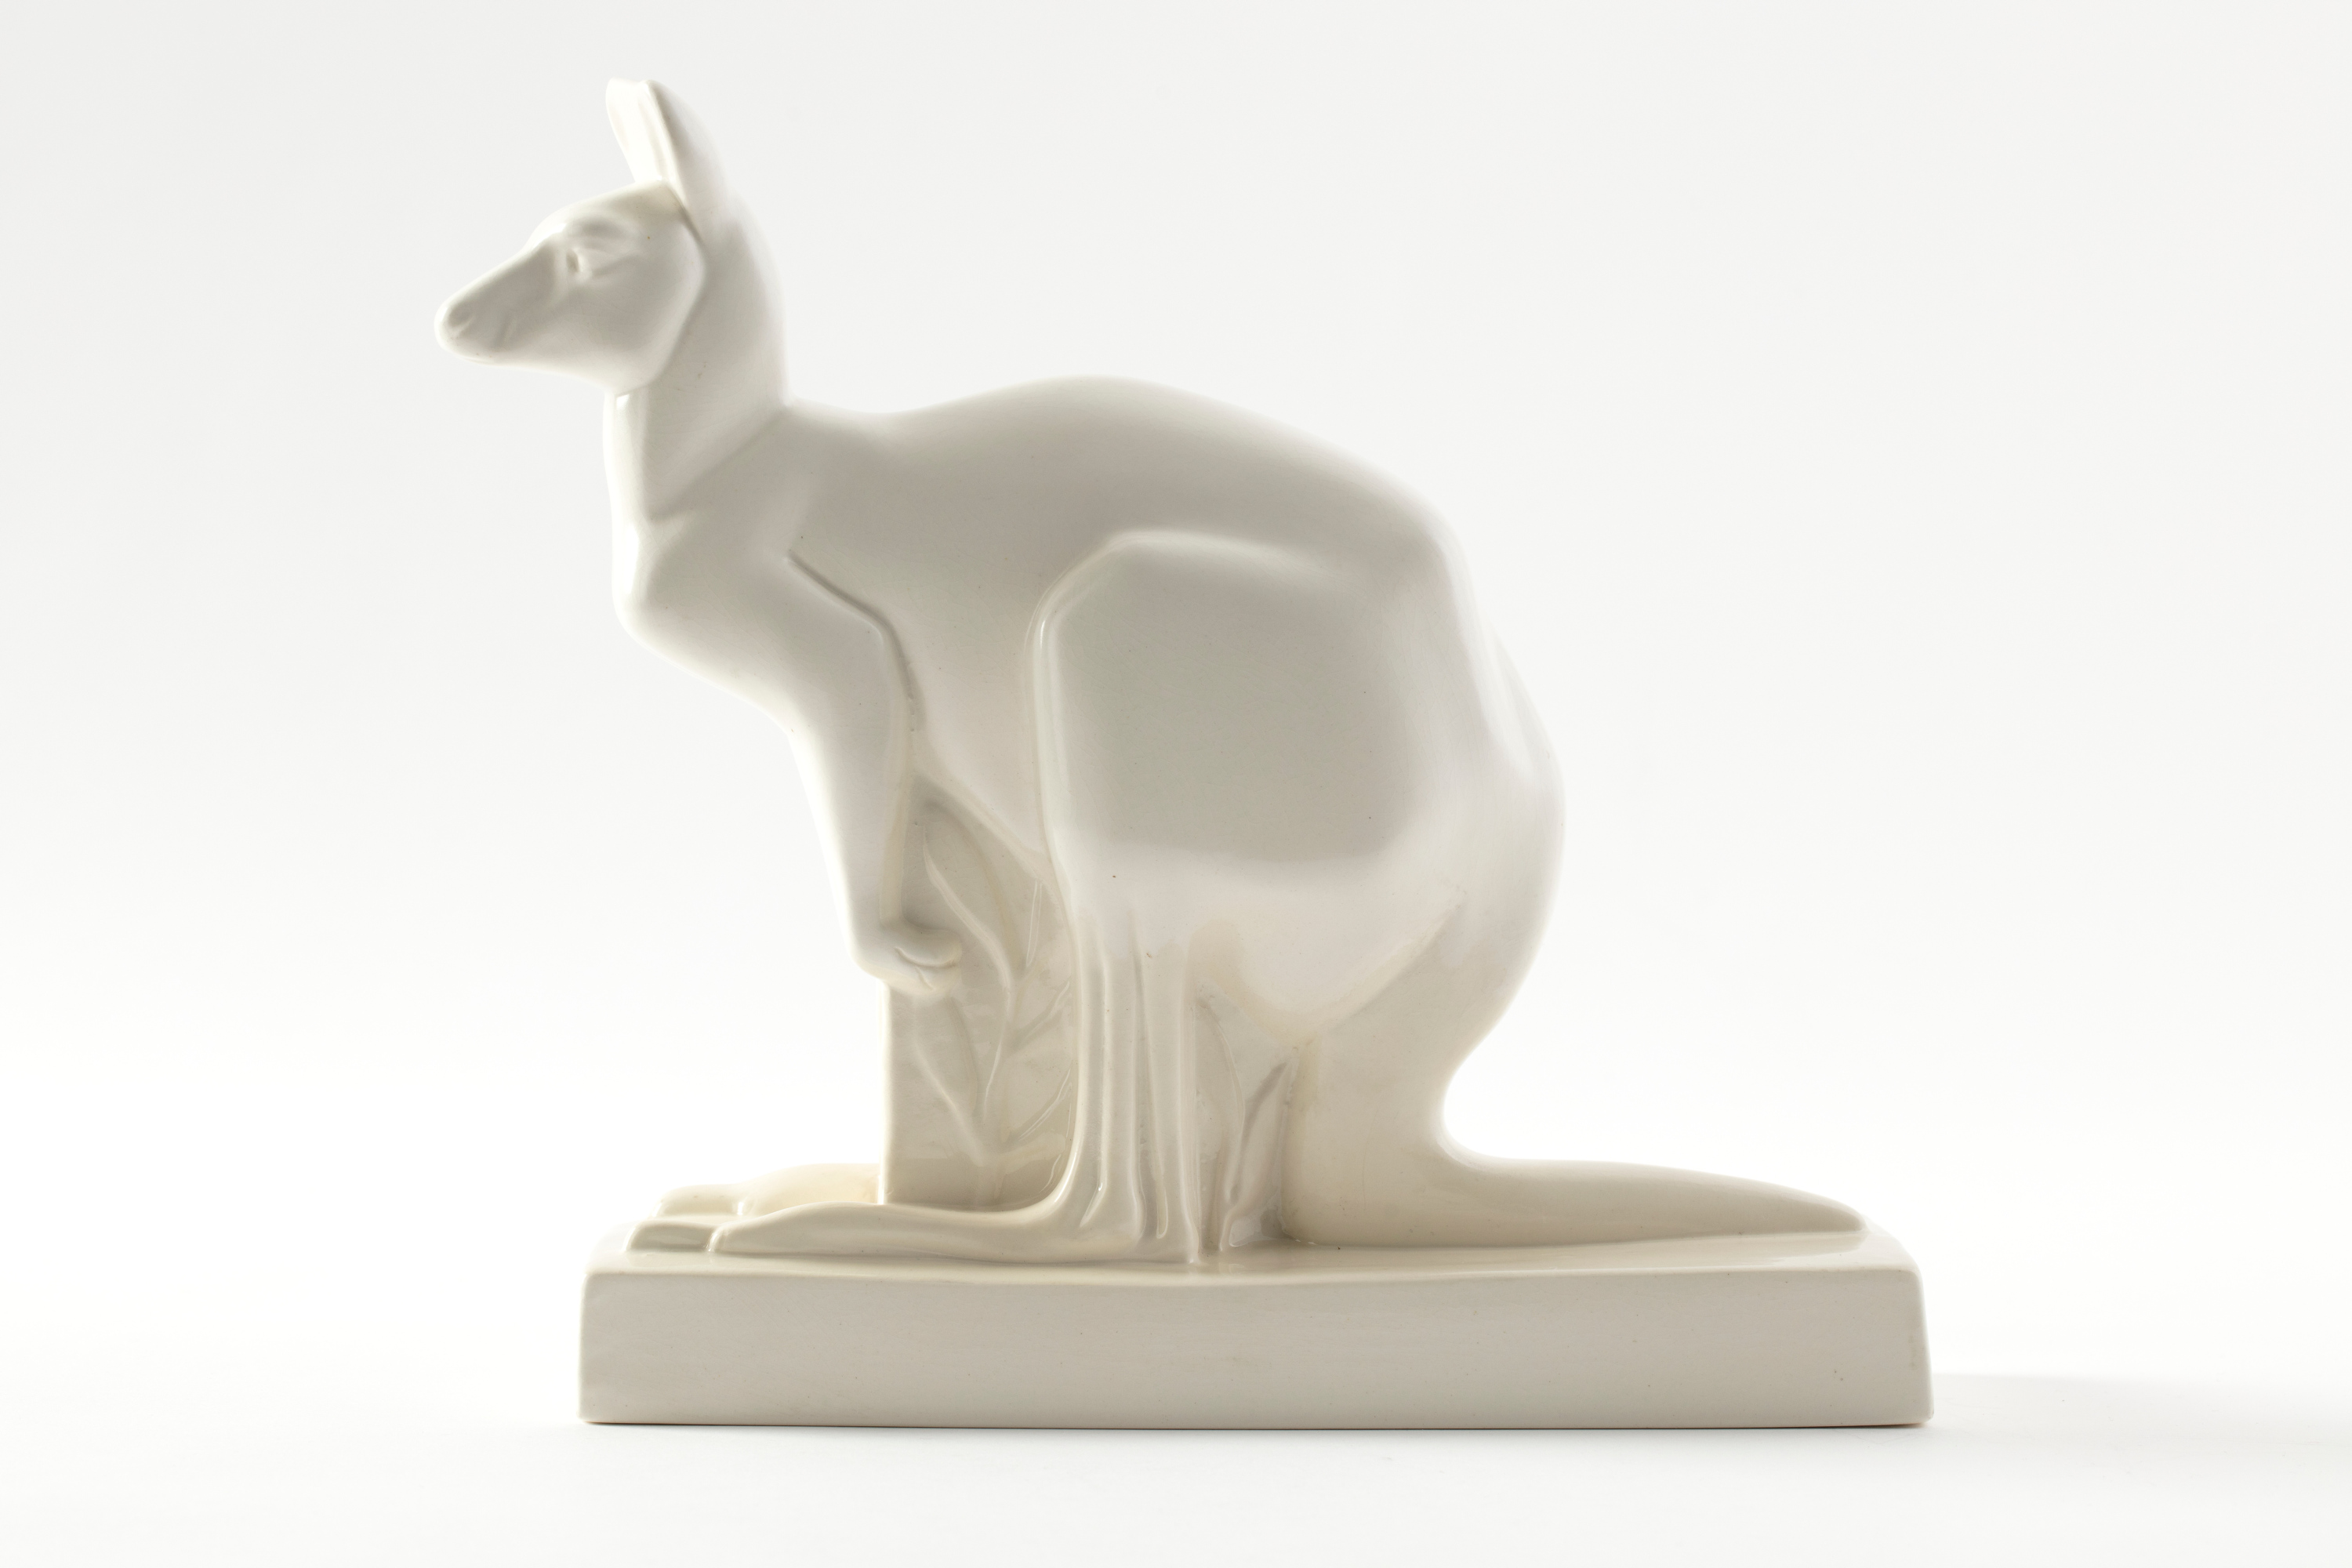 White earthenware kangaroo on a white studio background. The kangaroo has a minimalist form, sits on a rectangular base, and is lit by soft lighting.